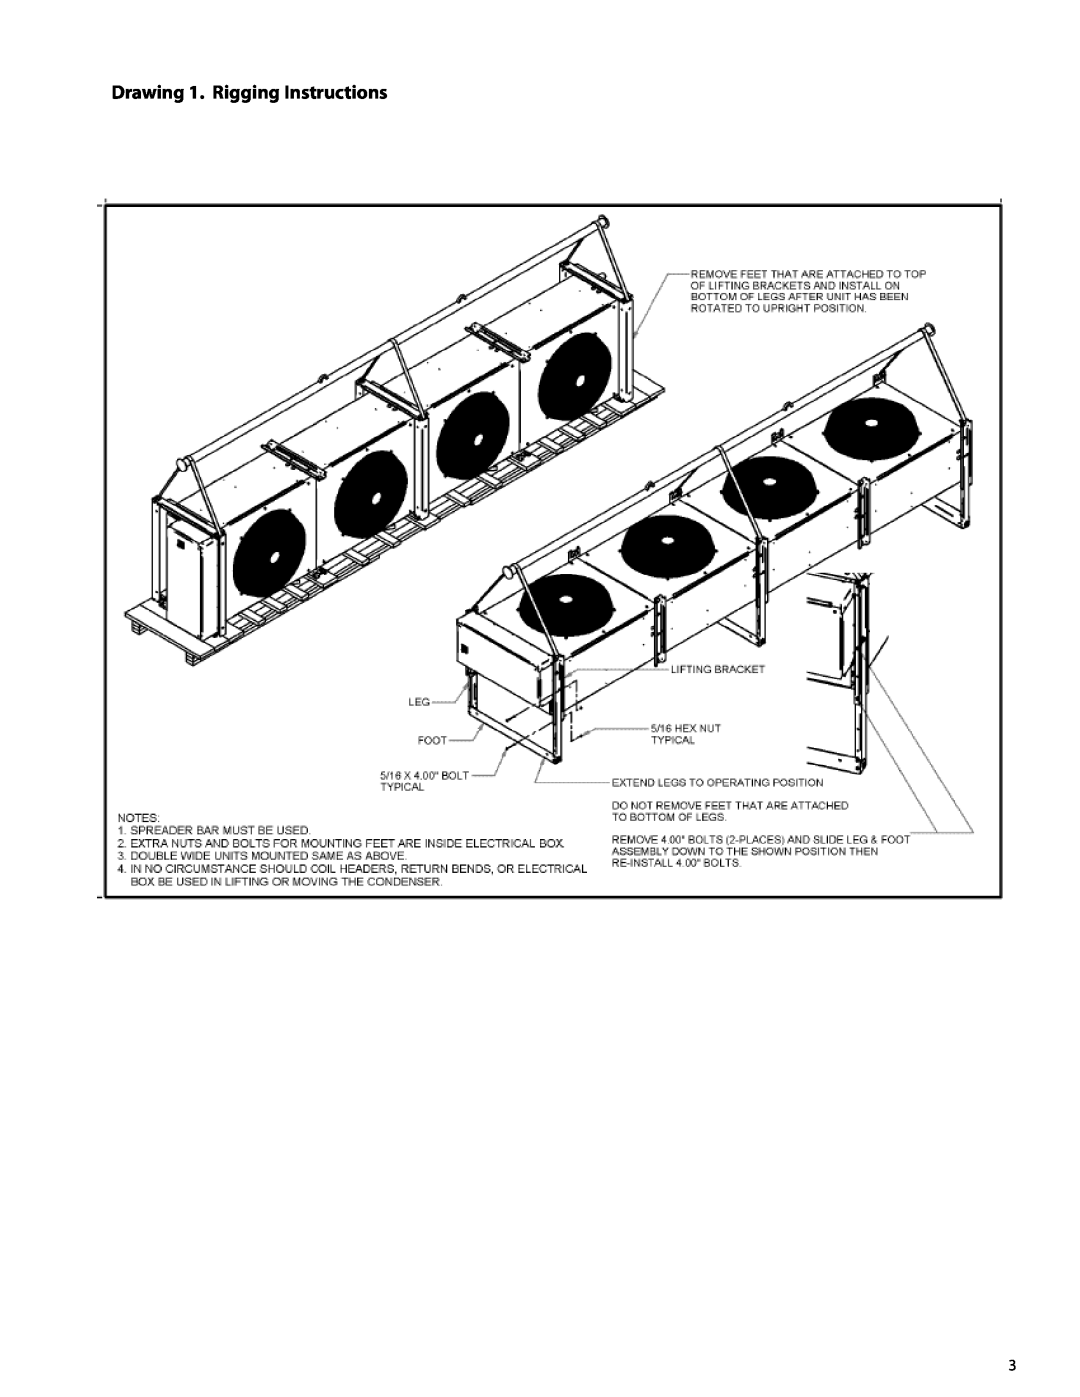 Heatcraft Refrigeration Products none installation and operation guide Drawing 1. Rigging Instructions 